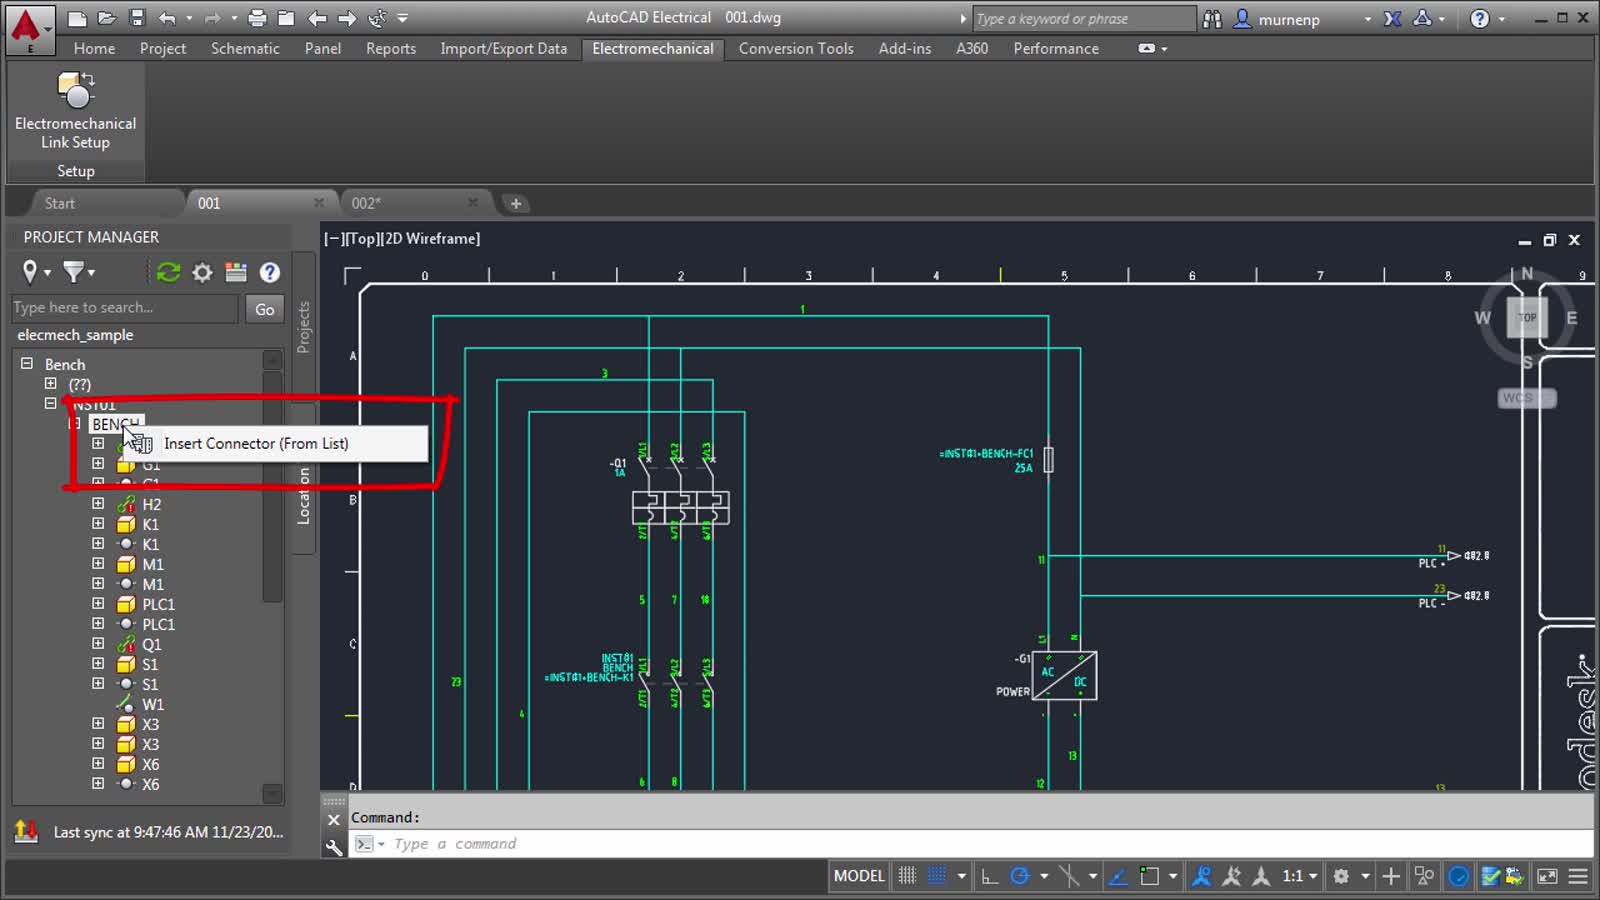 AutoCAD Electrical 2023 Help | AutoCAD Electrical 2017 New ...